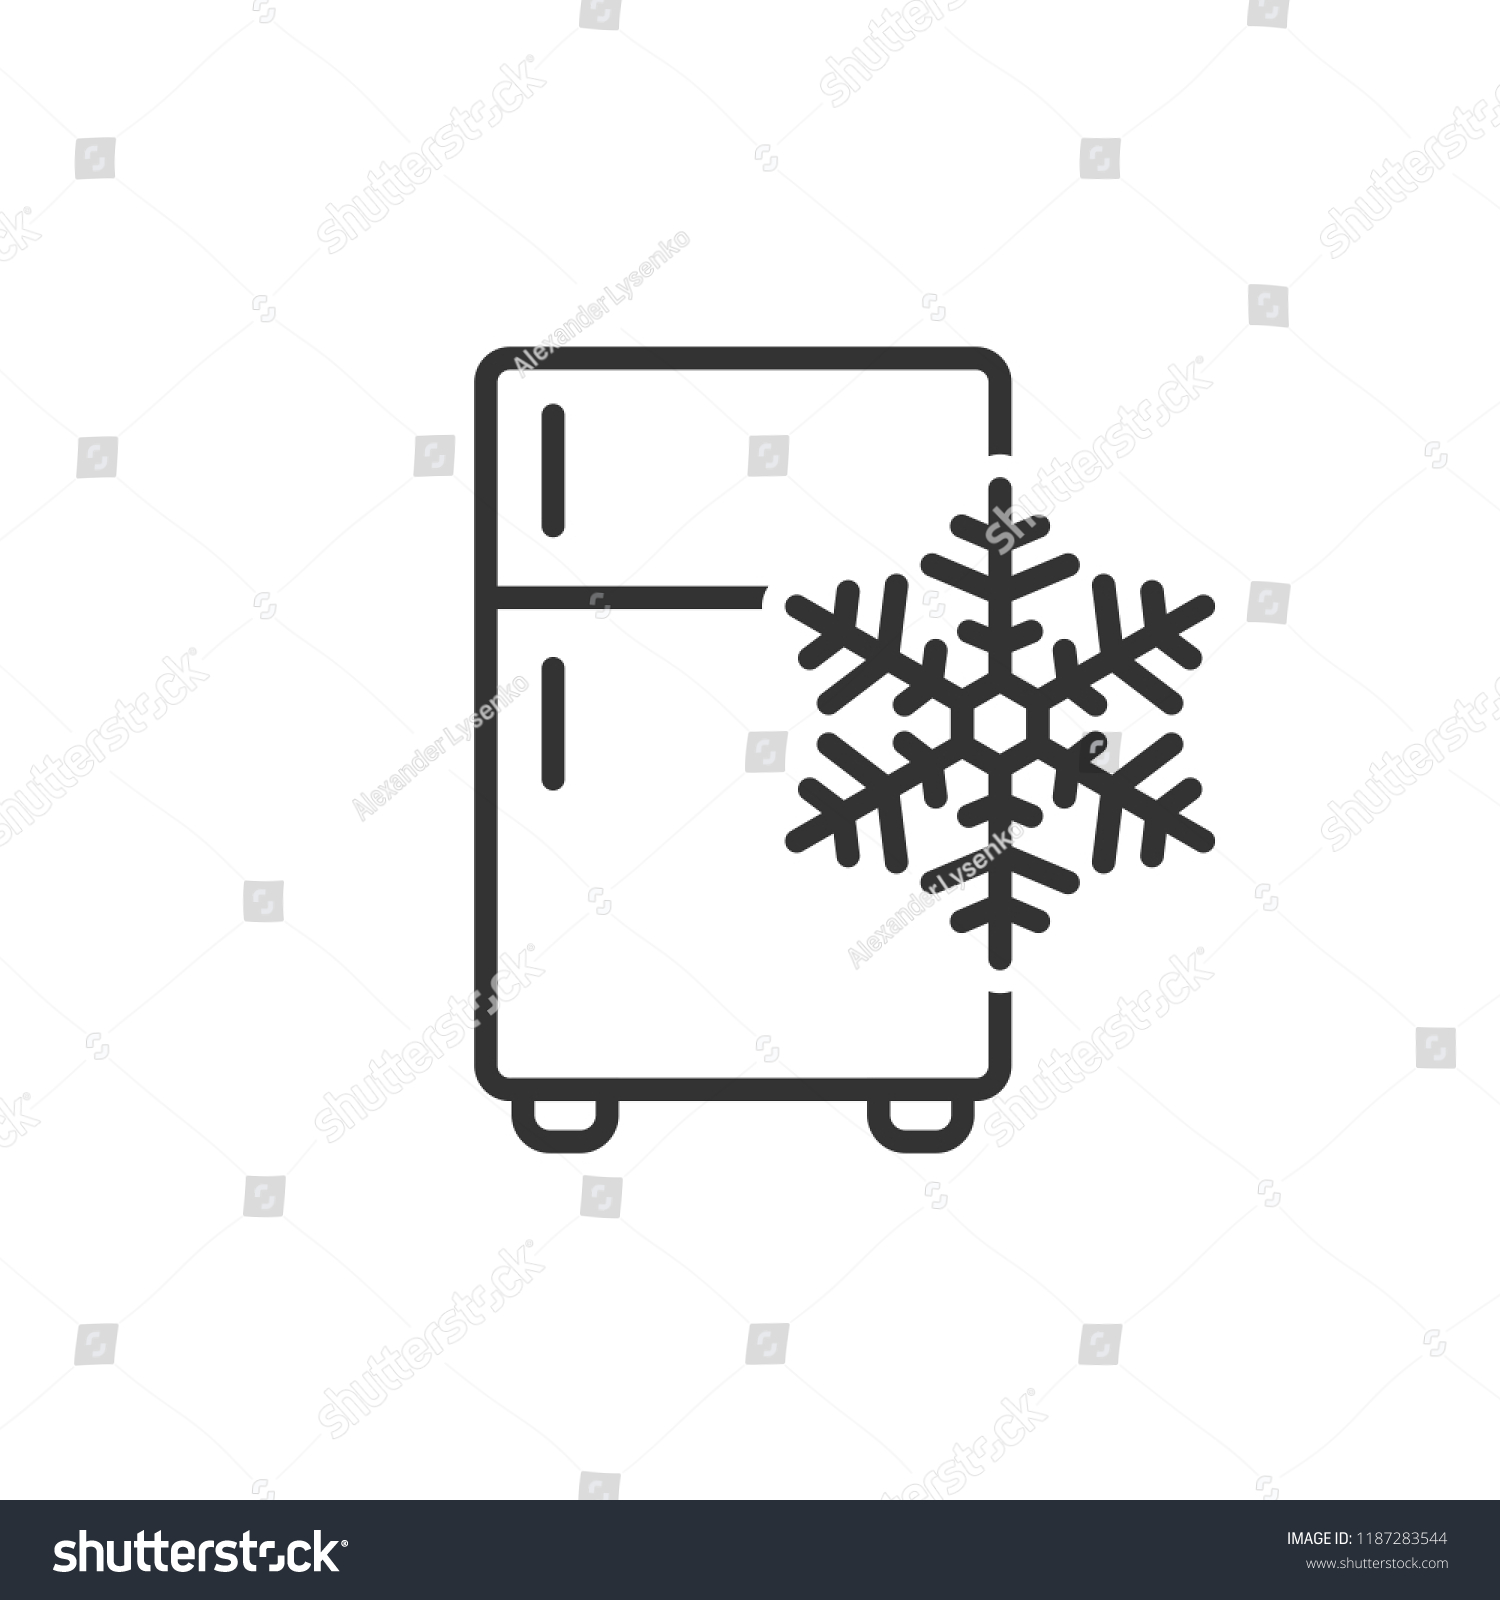 SVG of Fridge refrigerator icon in flat style. Freezer container vector illustration on white isolated background. Fridge business concept. svg